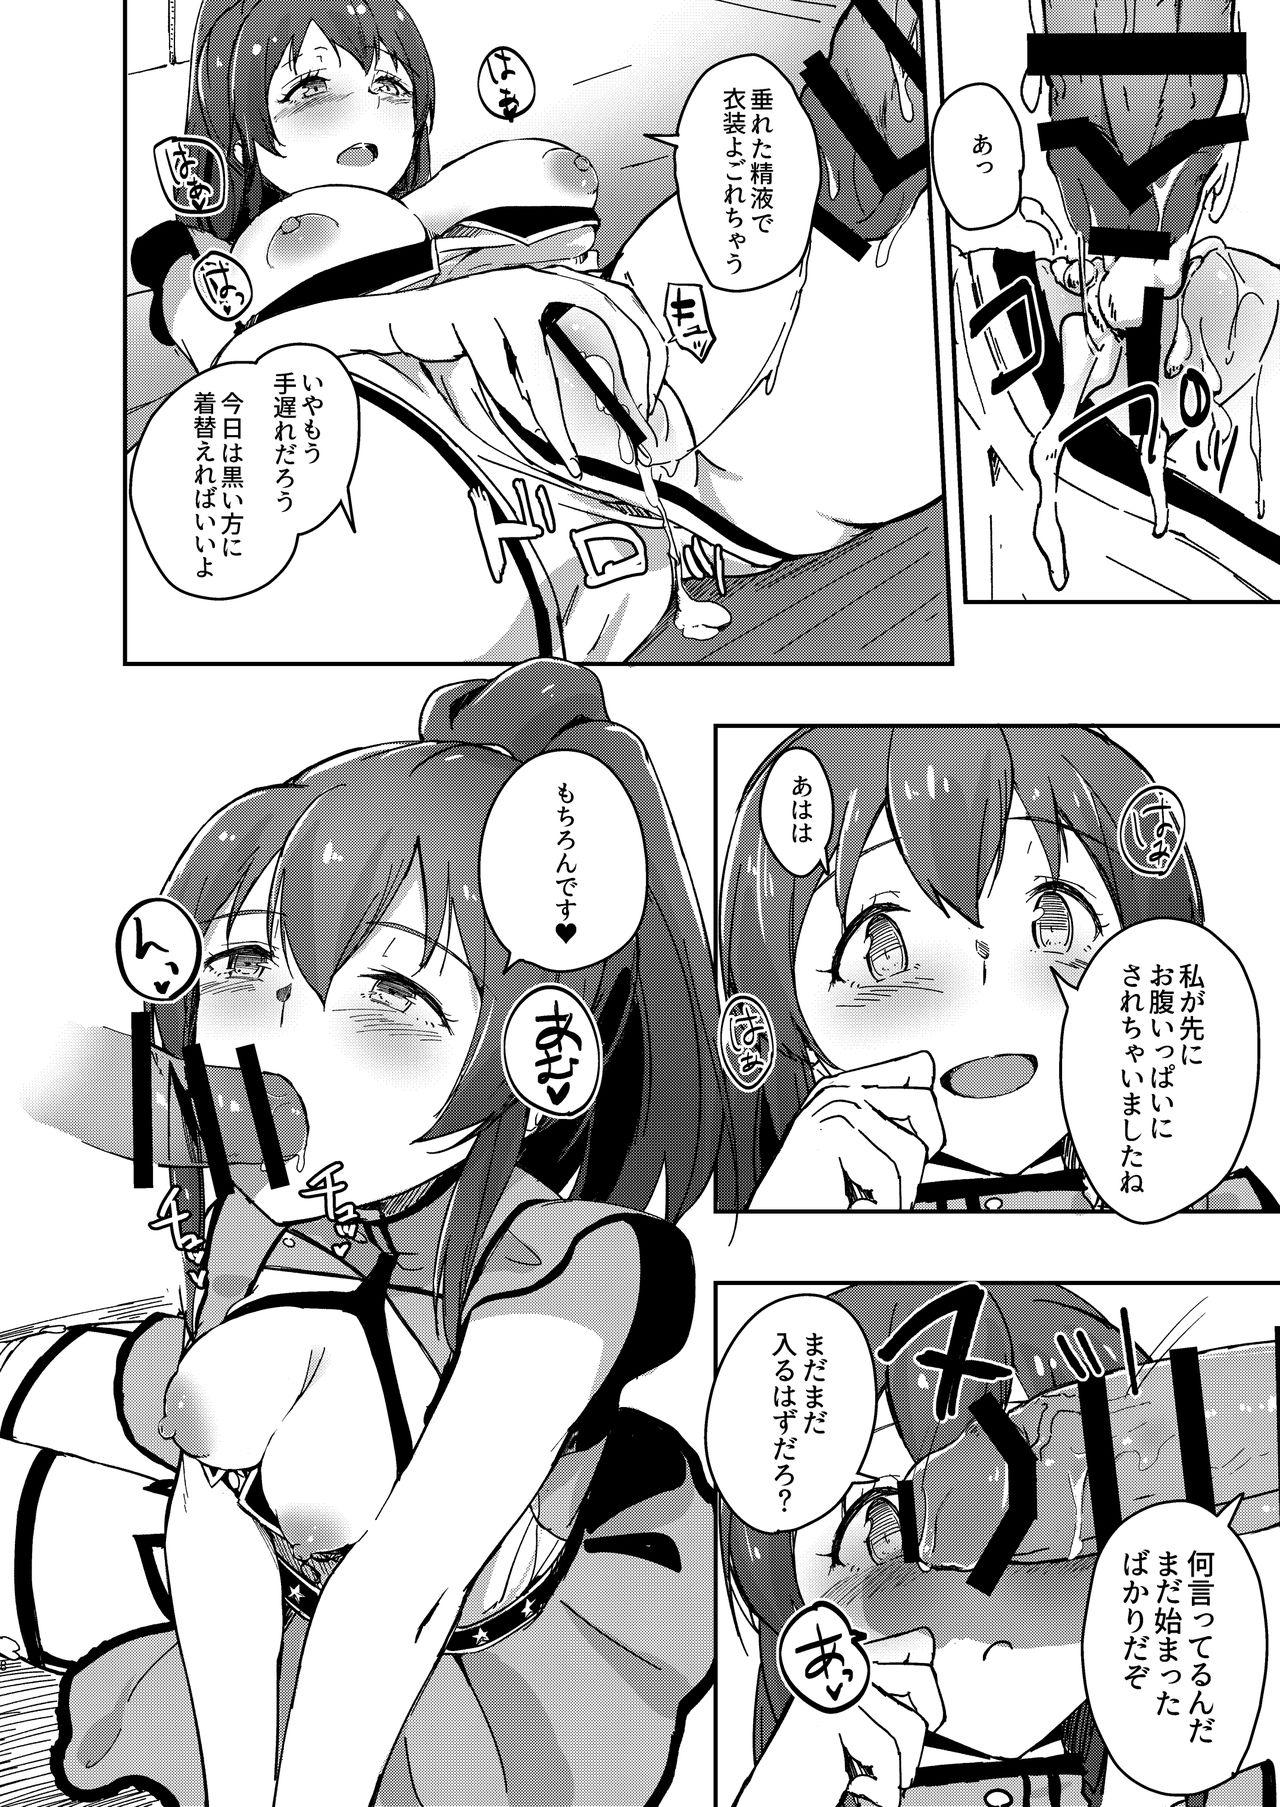 Foot TOP! CLOVER BOOK + omake - The idolmaster Bj - Page 7